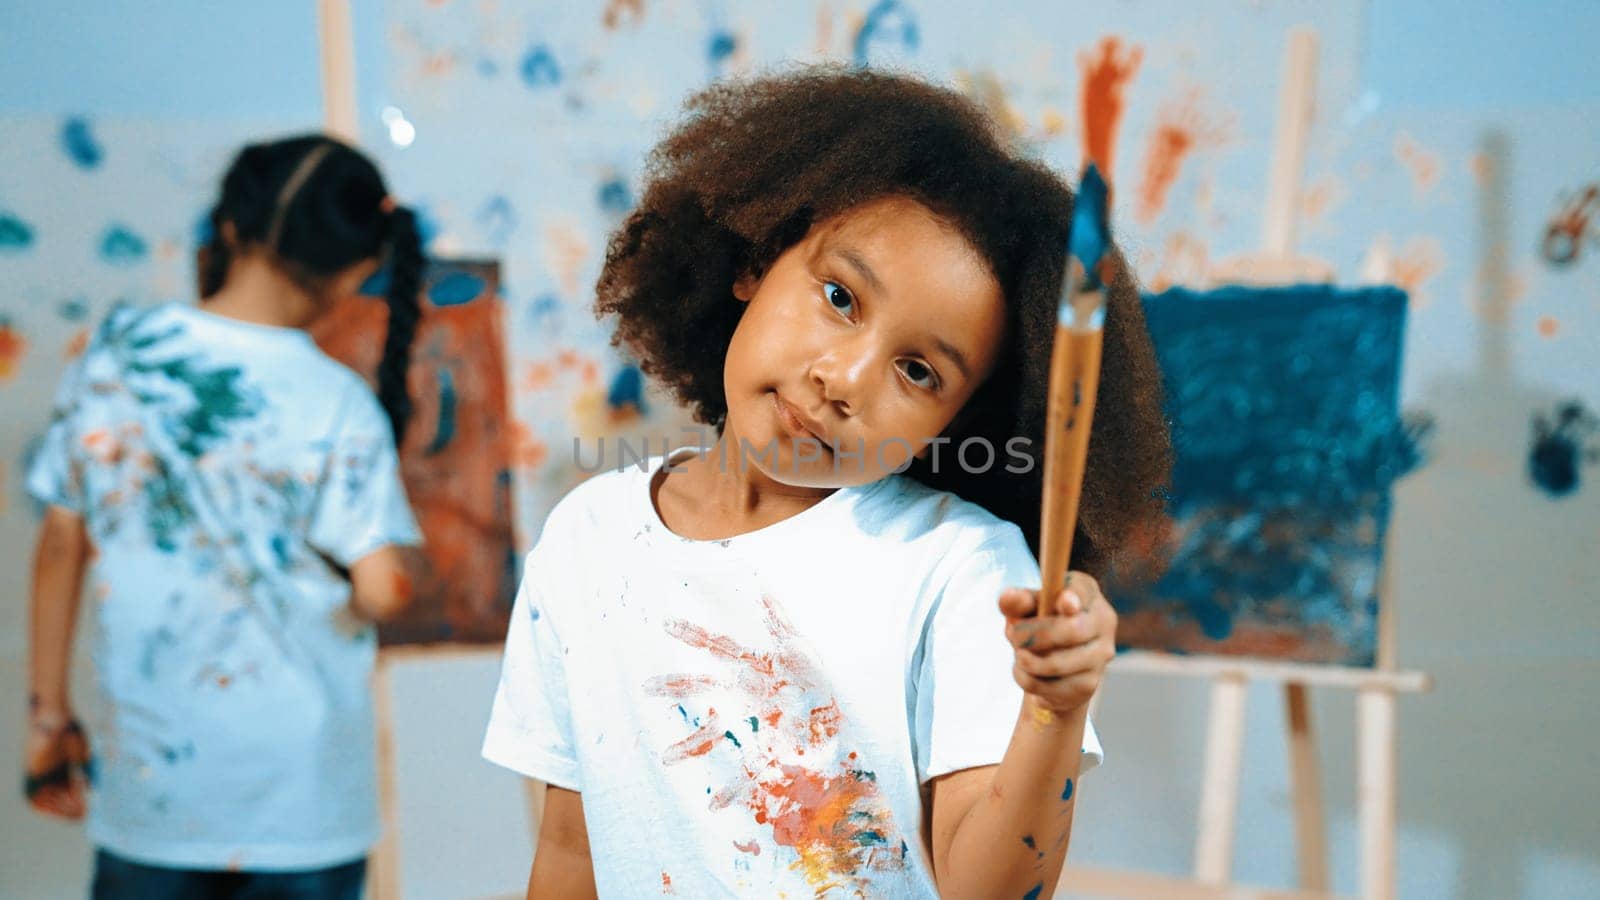 Cute african girl holding painted brush while student drawing canvas behind. Multicultural children attend in art lesson while pretty learner looking at camera. Creative activity concept. Erudition.